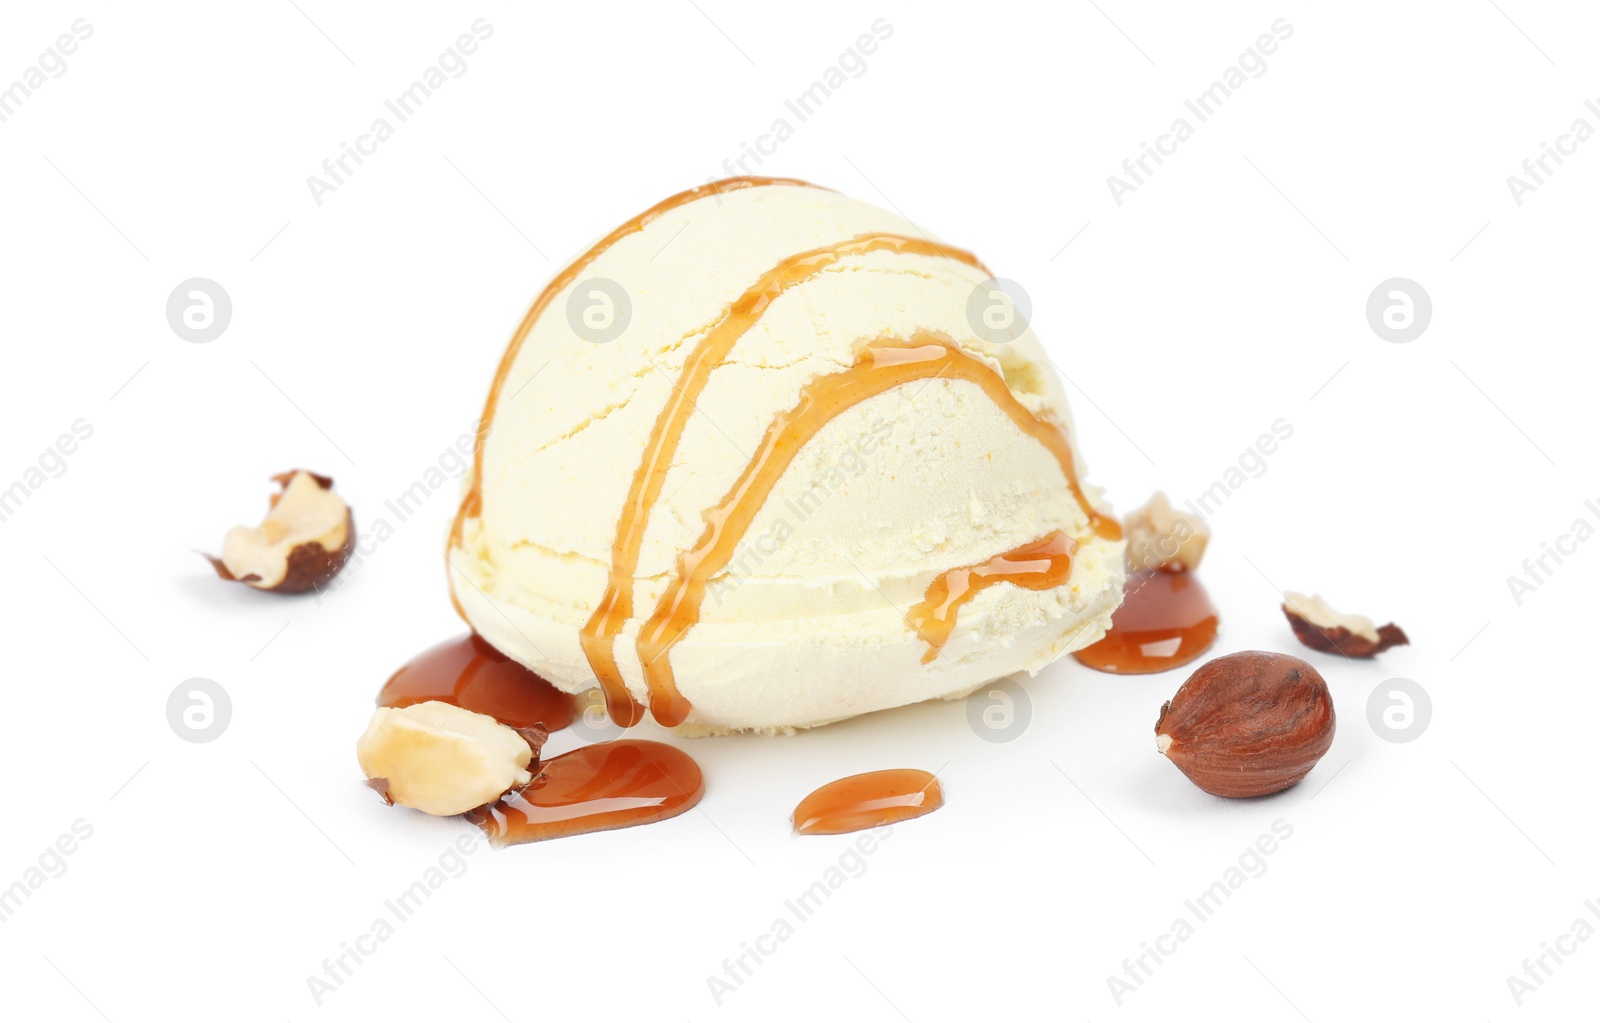 Photo of Ball of delicious vanilla ice cream with hazelnuts and sauce on white background